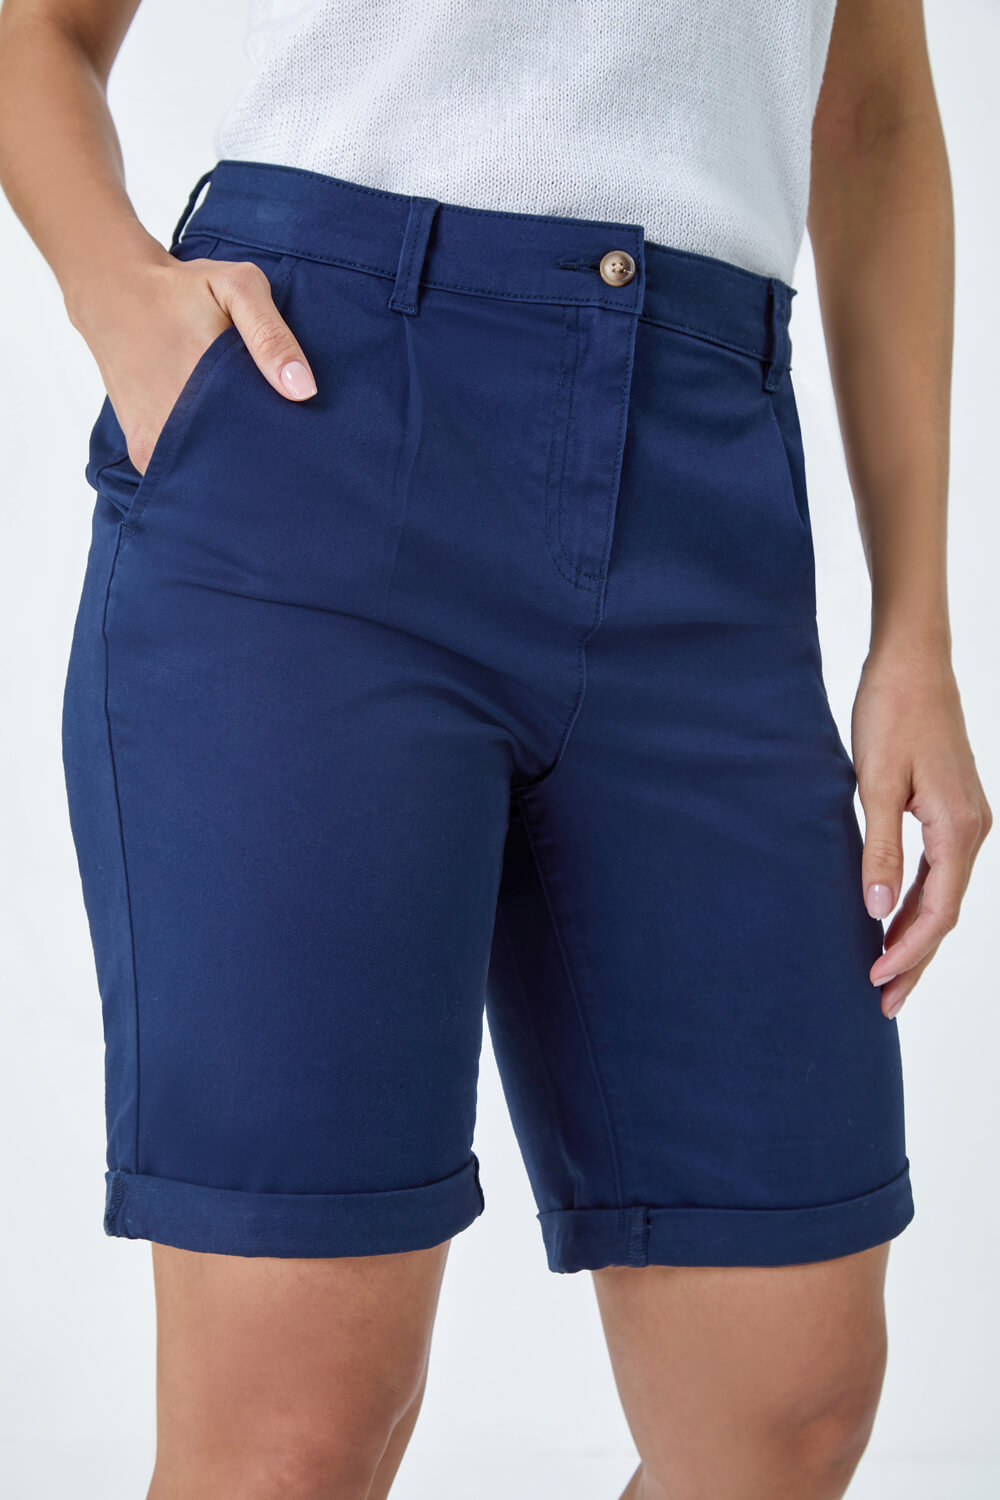 Navy  Cotton Blend Chino Shorts, Image 5 of 5